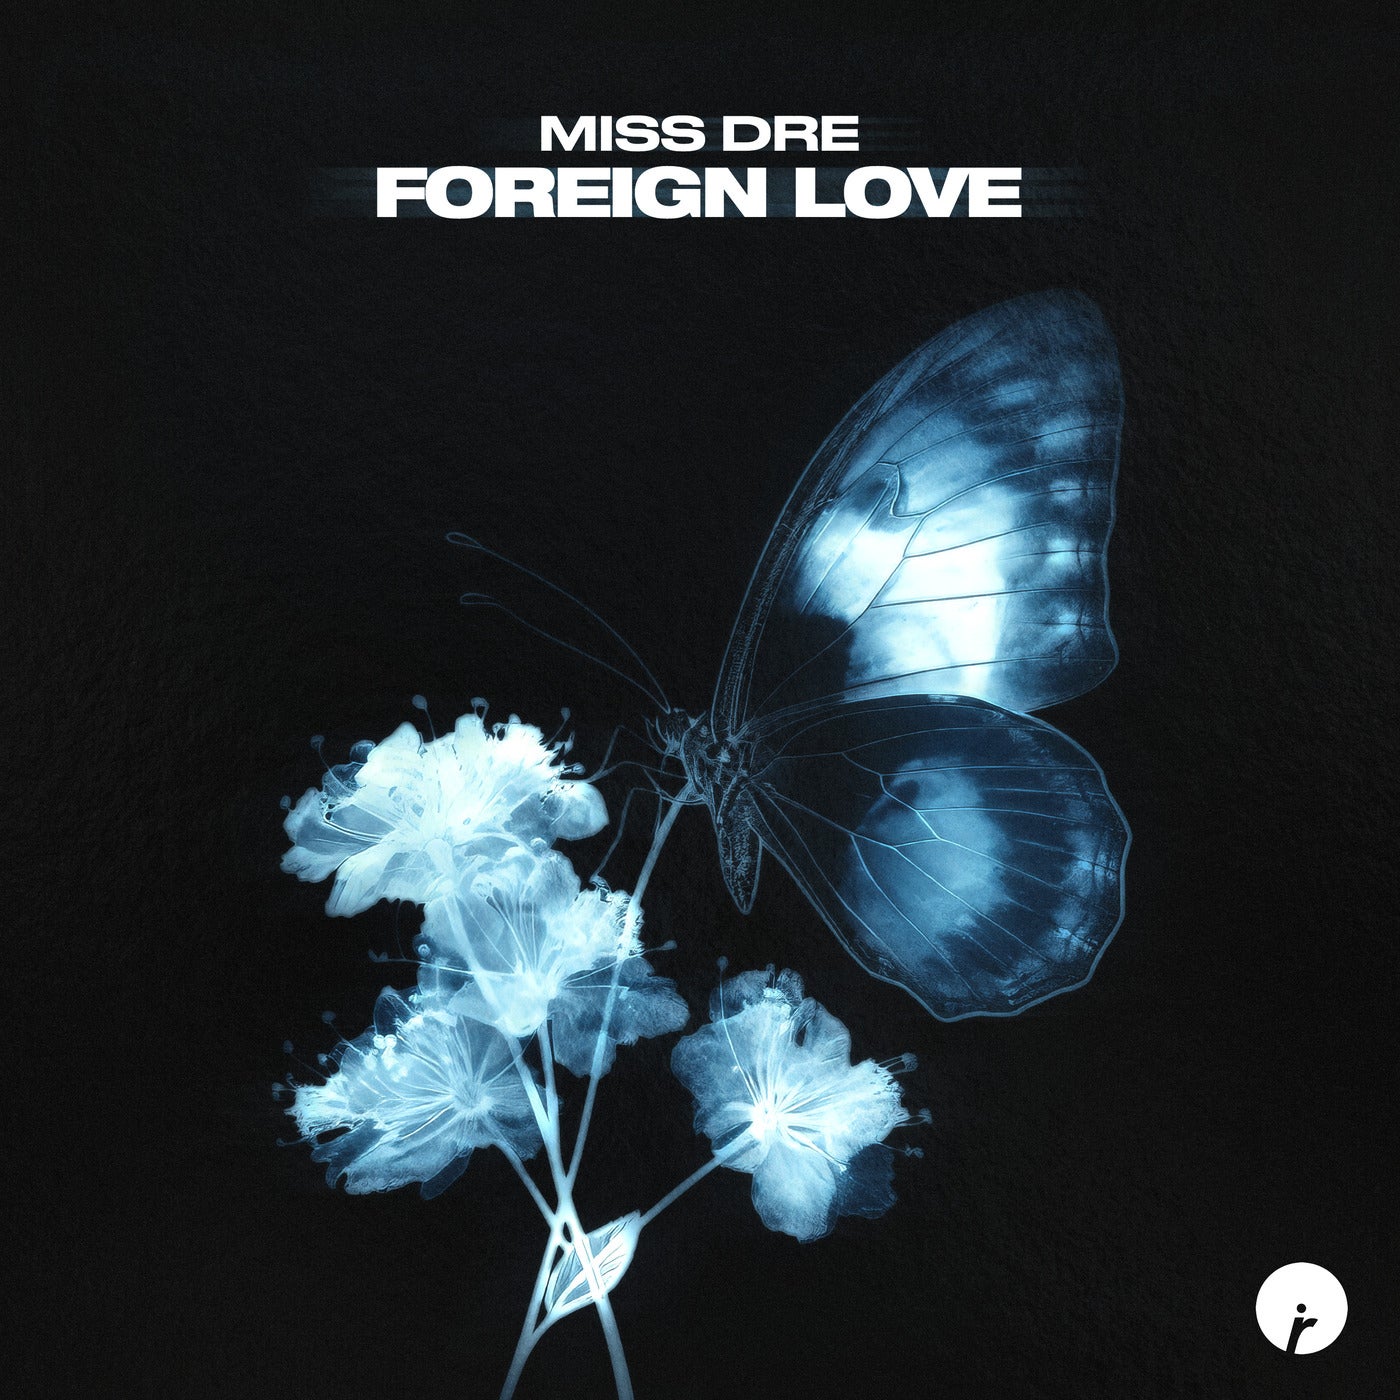 Cover - MISS DRE - Foreign Love (Original Mix)